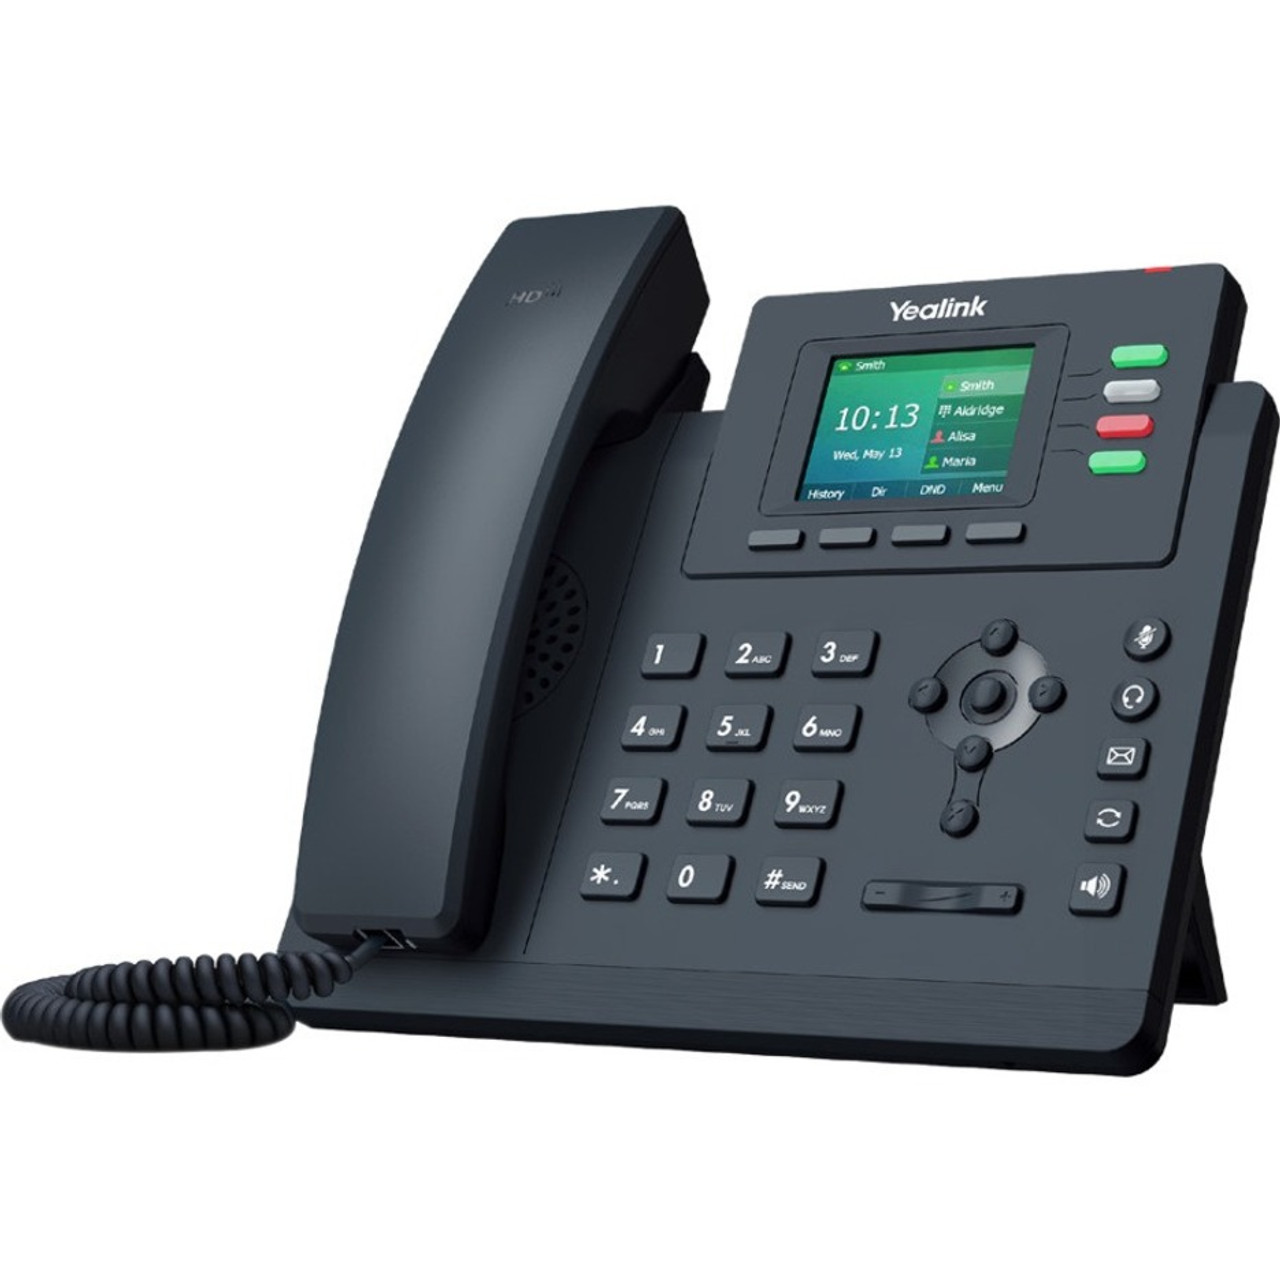 Yealink SIP-T33G IP Phone - Corded/Cordless - Corded - Wall Mountable, Desktop - Classic Gray - SIP-T33G